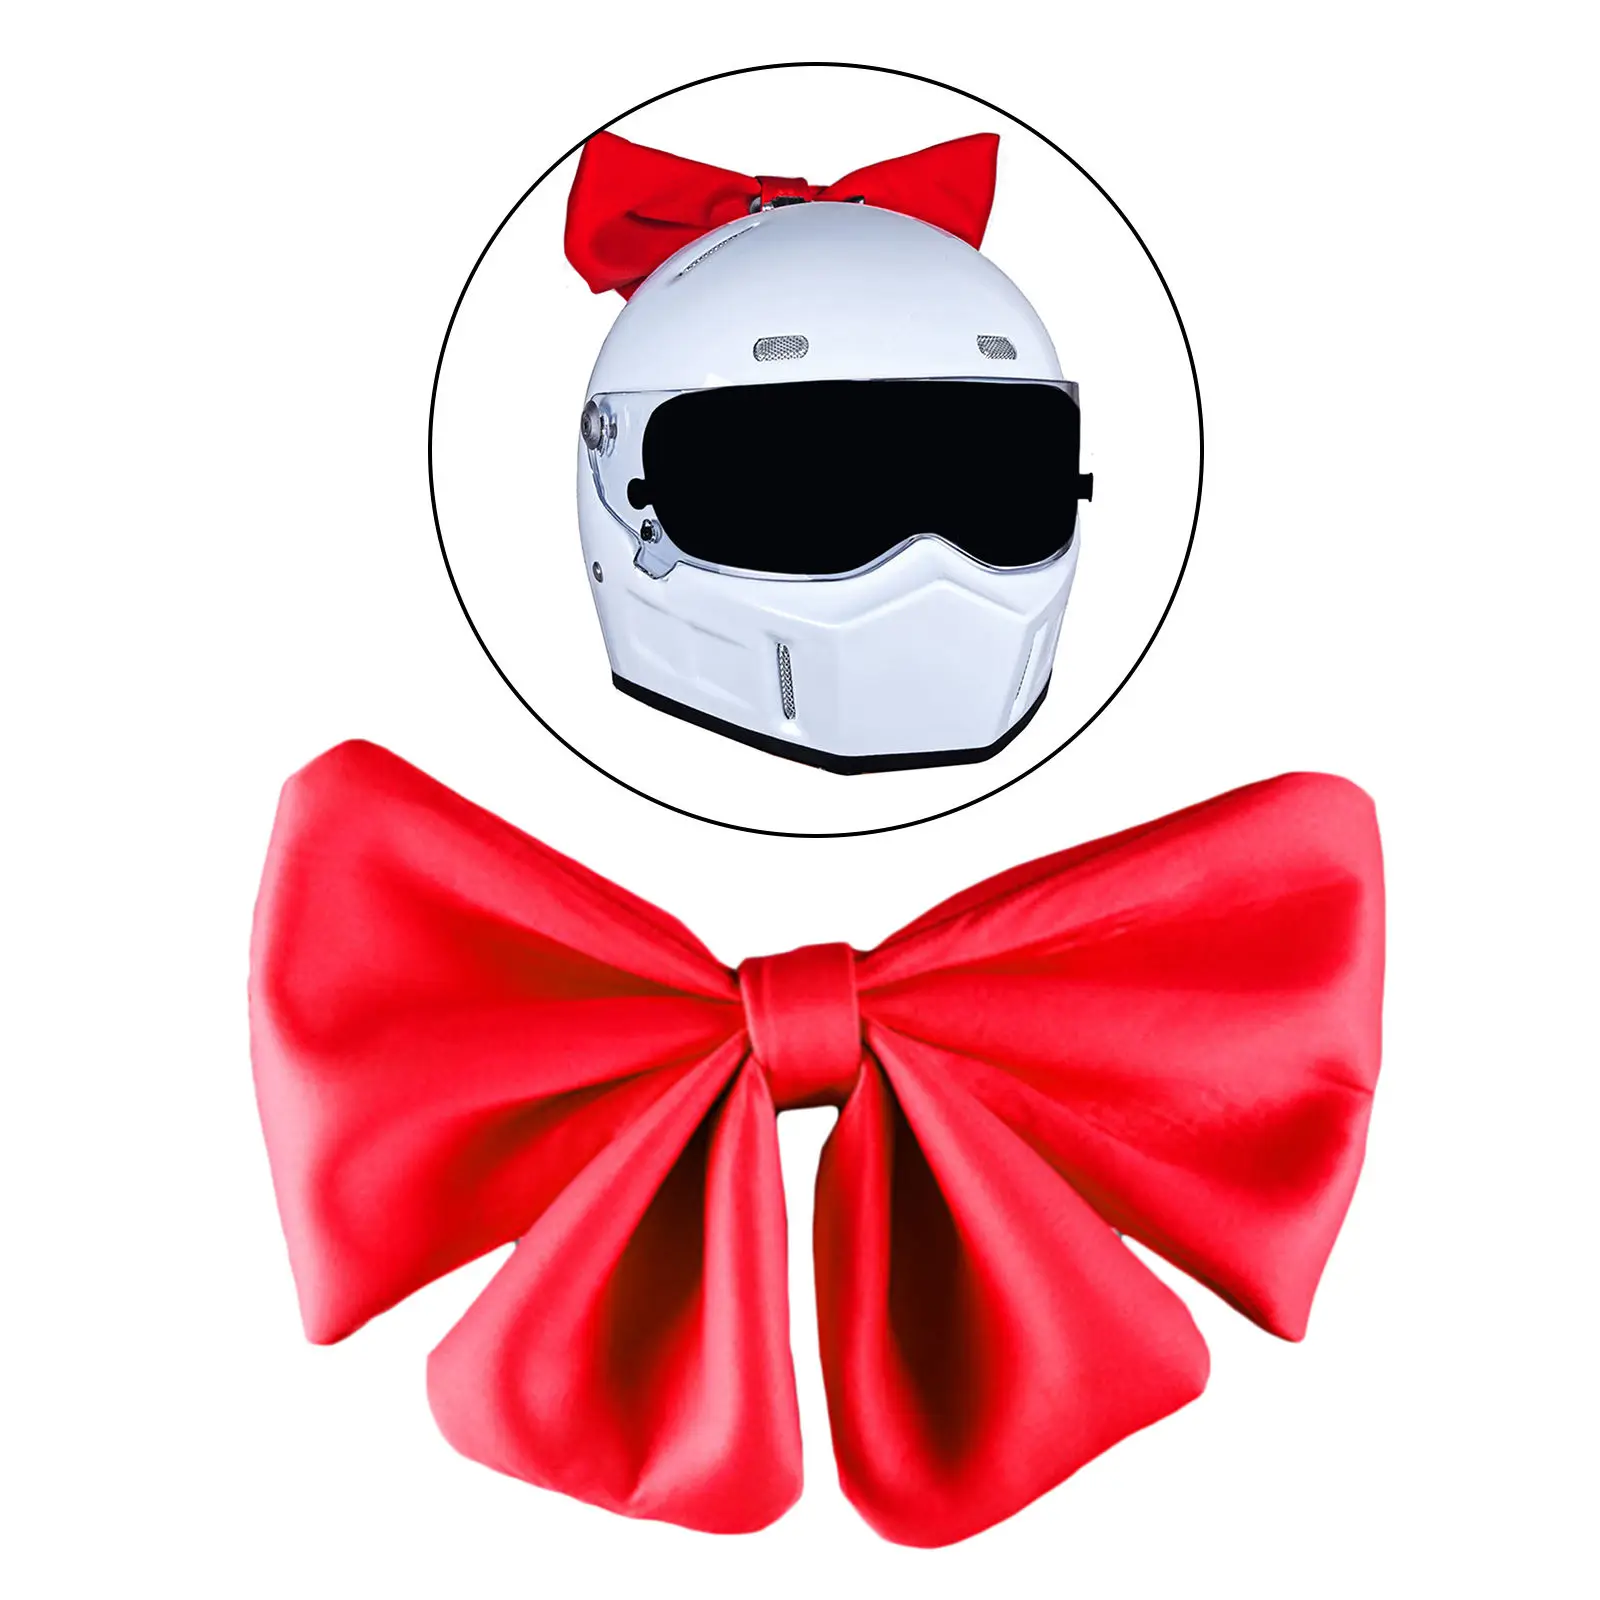 Motorcycle Helmet Decor Women Girl Hair Accessory for Motor Helmet Decoration Car Styling Gifts